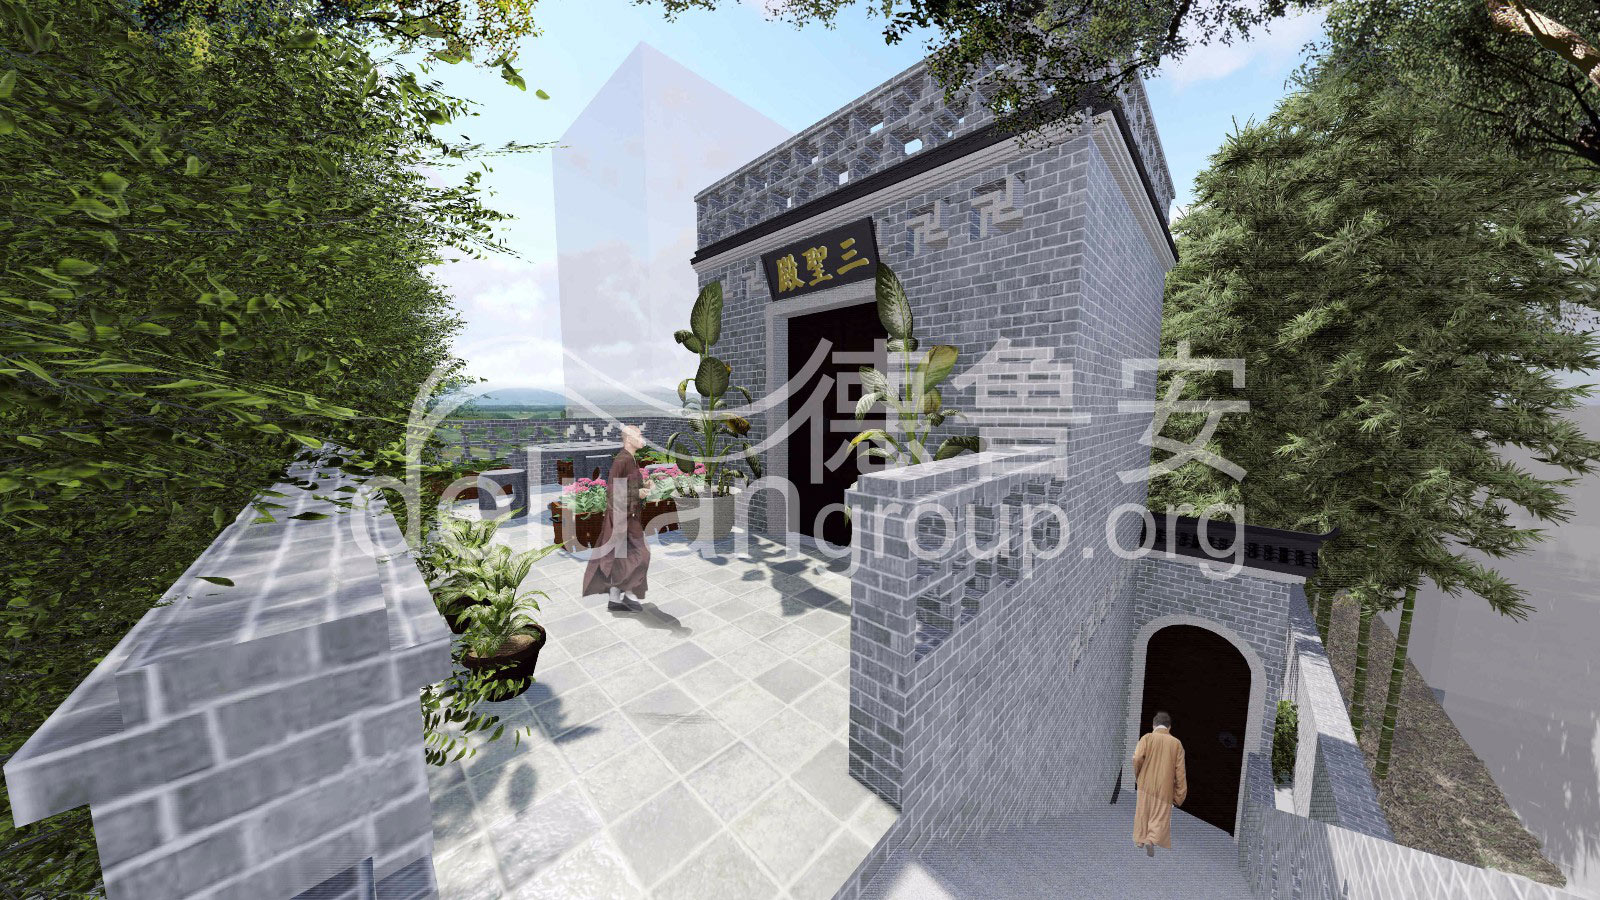 Design of single building of Jialan temple in Wuxue Hubei Province(图13)